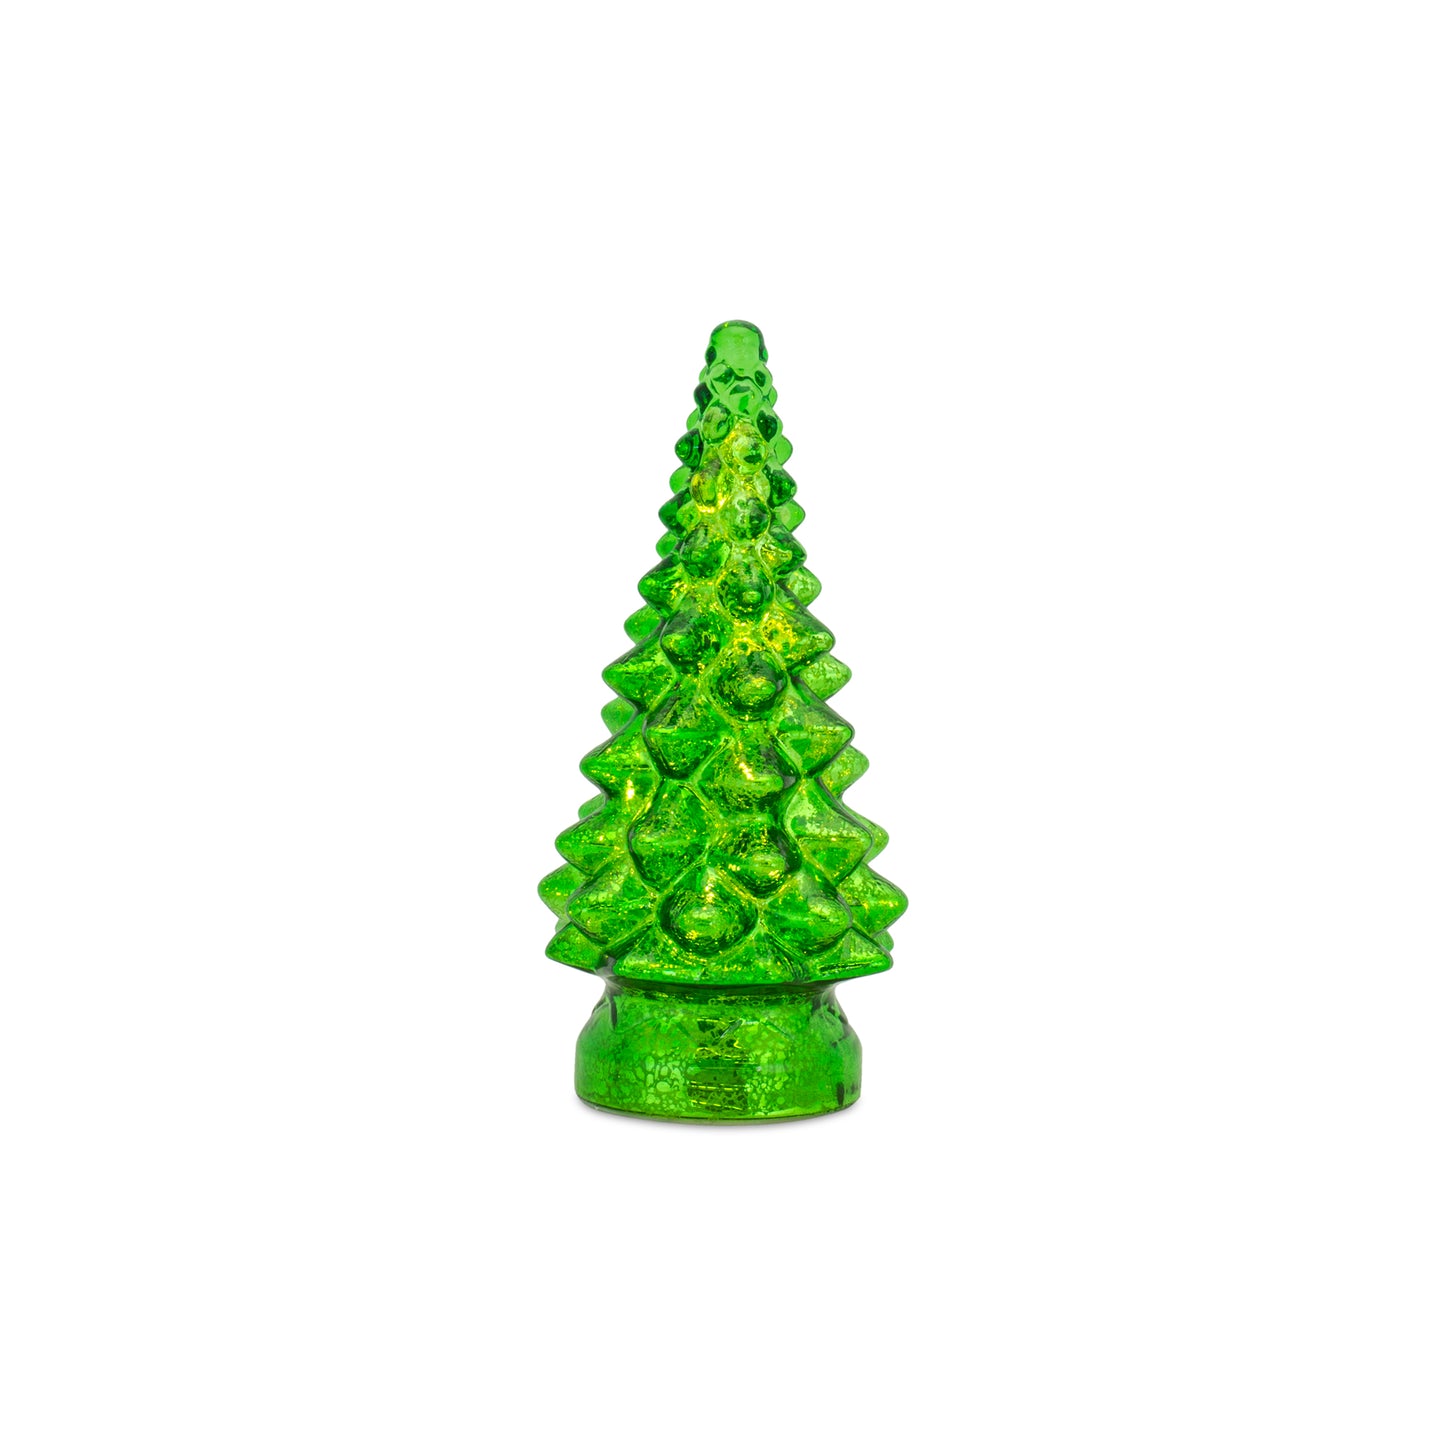 LED Glass Tree Choice of 10"H, 13.25"H, or 15.5"H